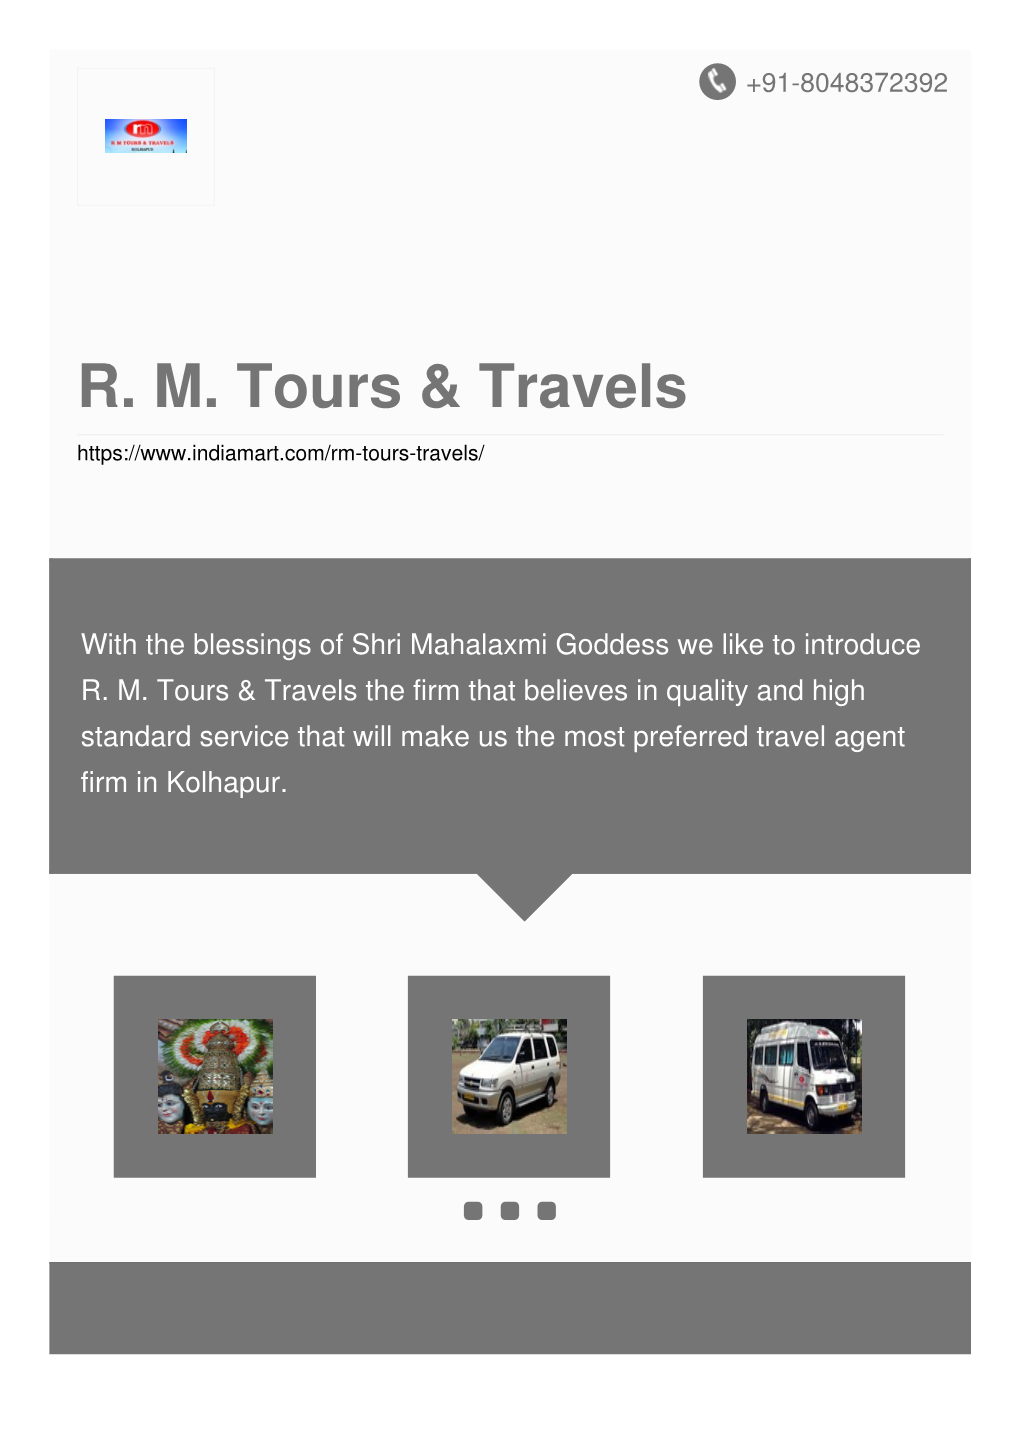 RM Tours & Travels